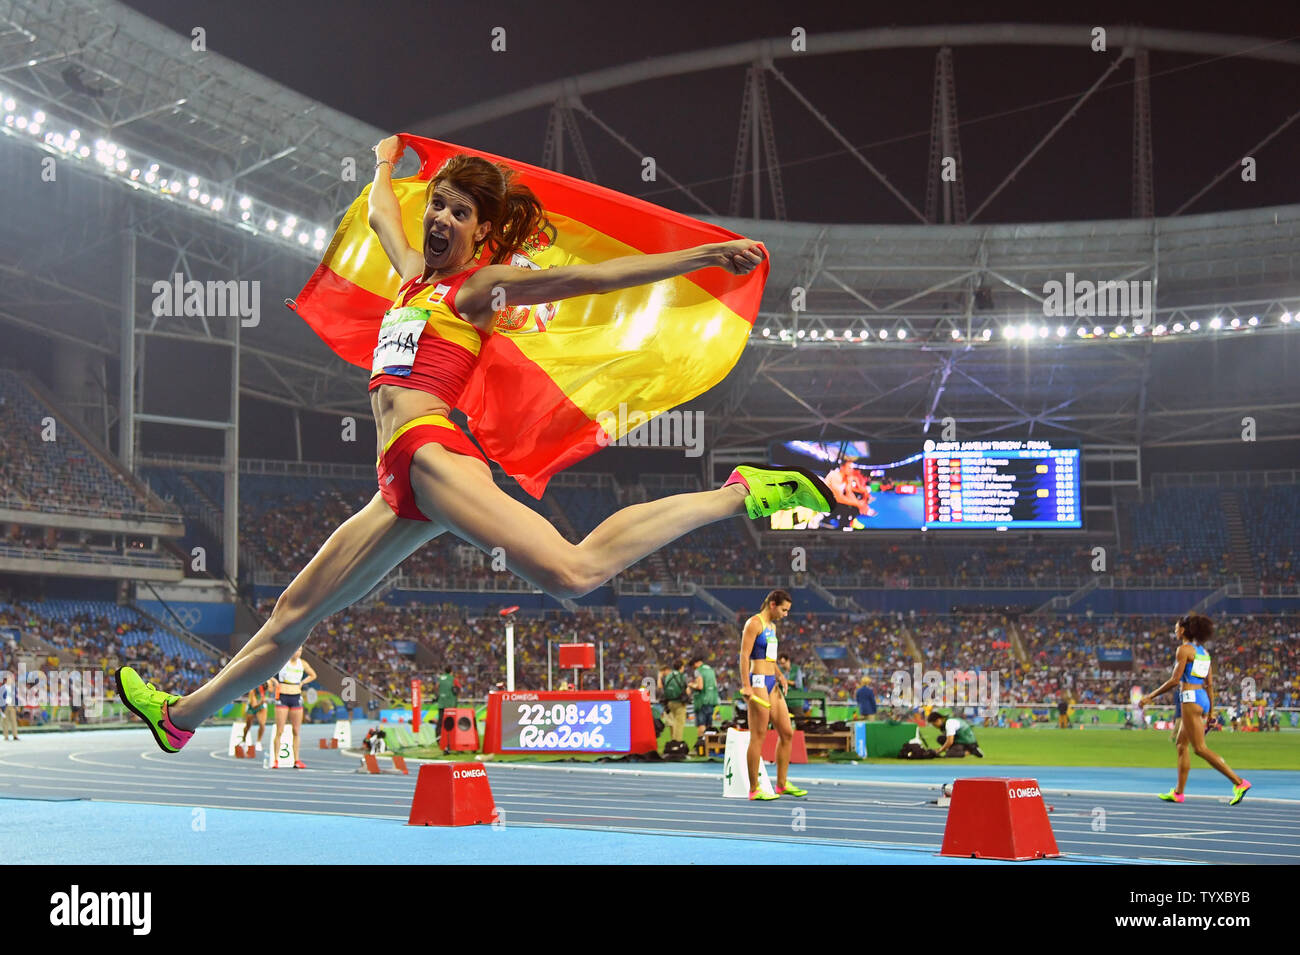 Ruth Beitia of Spain leaps in the air after winning gold in the Women's High Jump Final at Olympic Stadium at the 2016 Rio Summer Olympics in Rio de Janeiro, Brazil, on August 20, 2016.   Photo by Kevin Dietsch/UPI Stock Photo